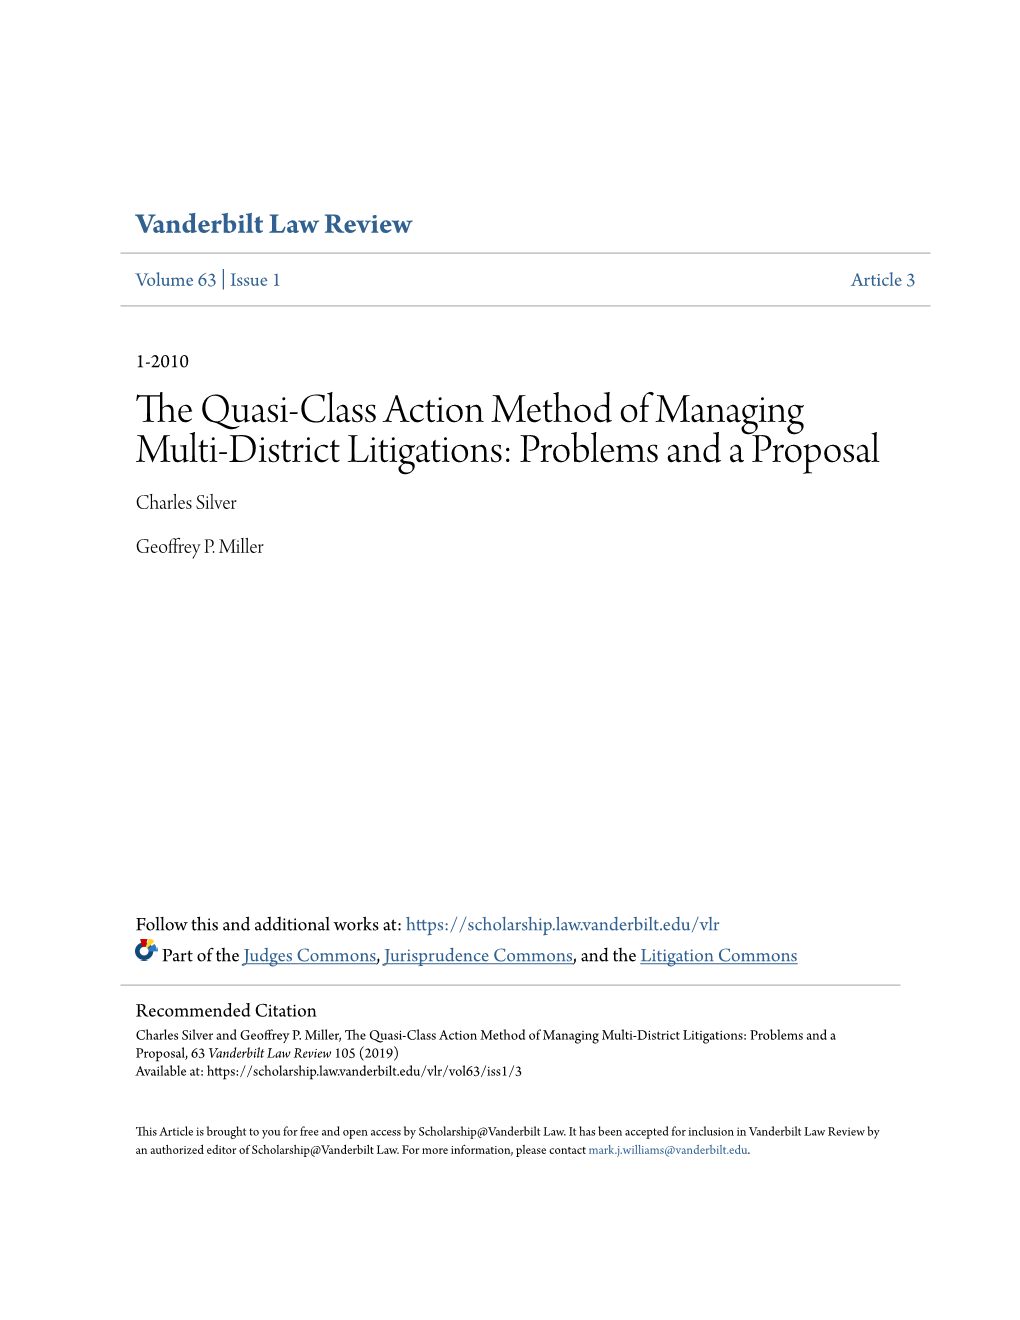 The Quasi-Class Action Method of Managing Multi-District Litigations: Problems and a Proposal Charles Silver